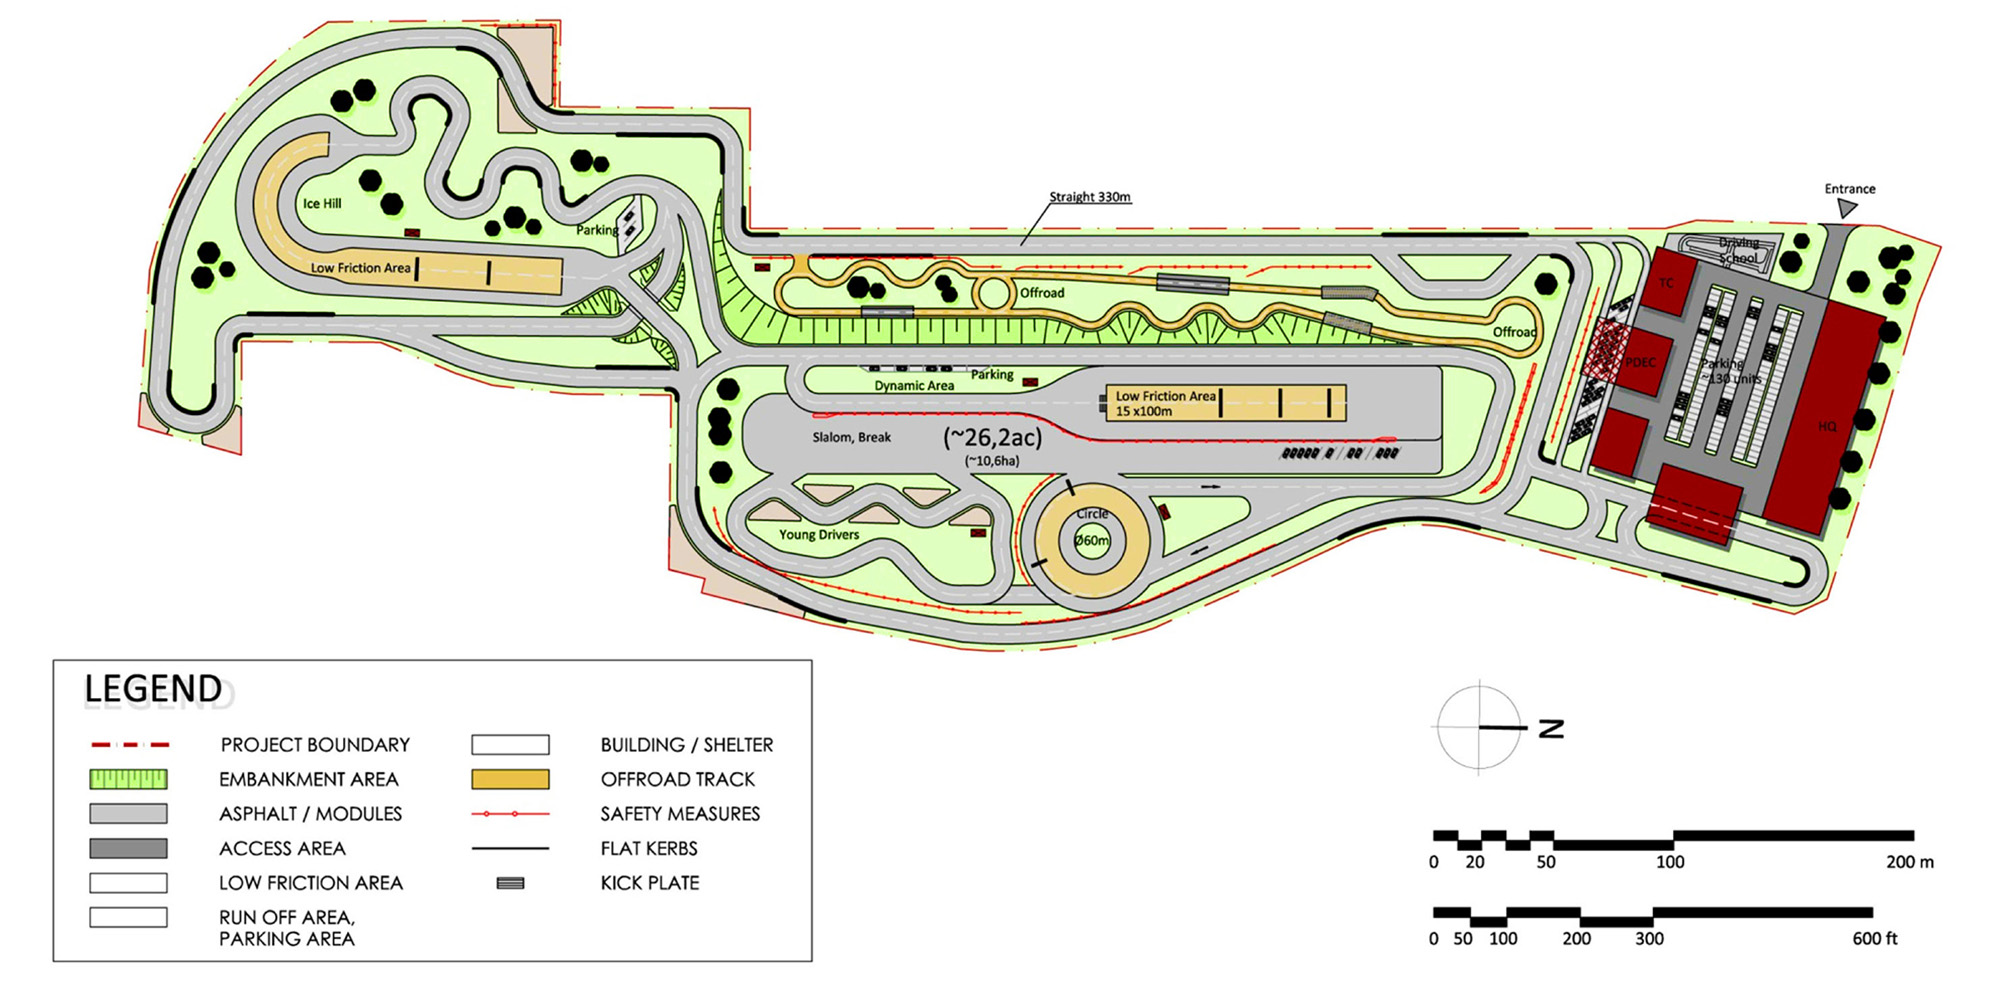 Porsche experience center plan. For full text, download project PDF below